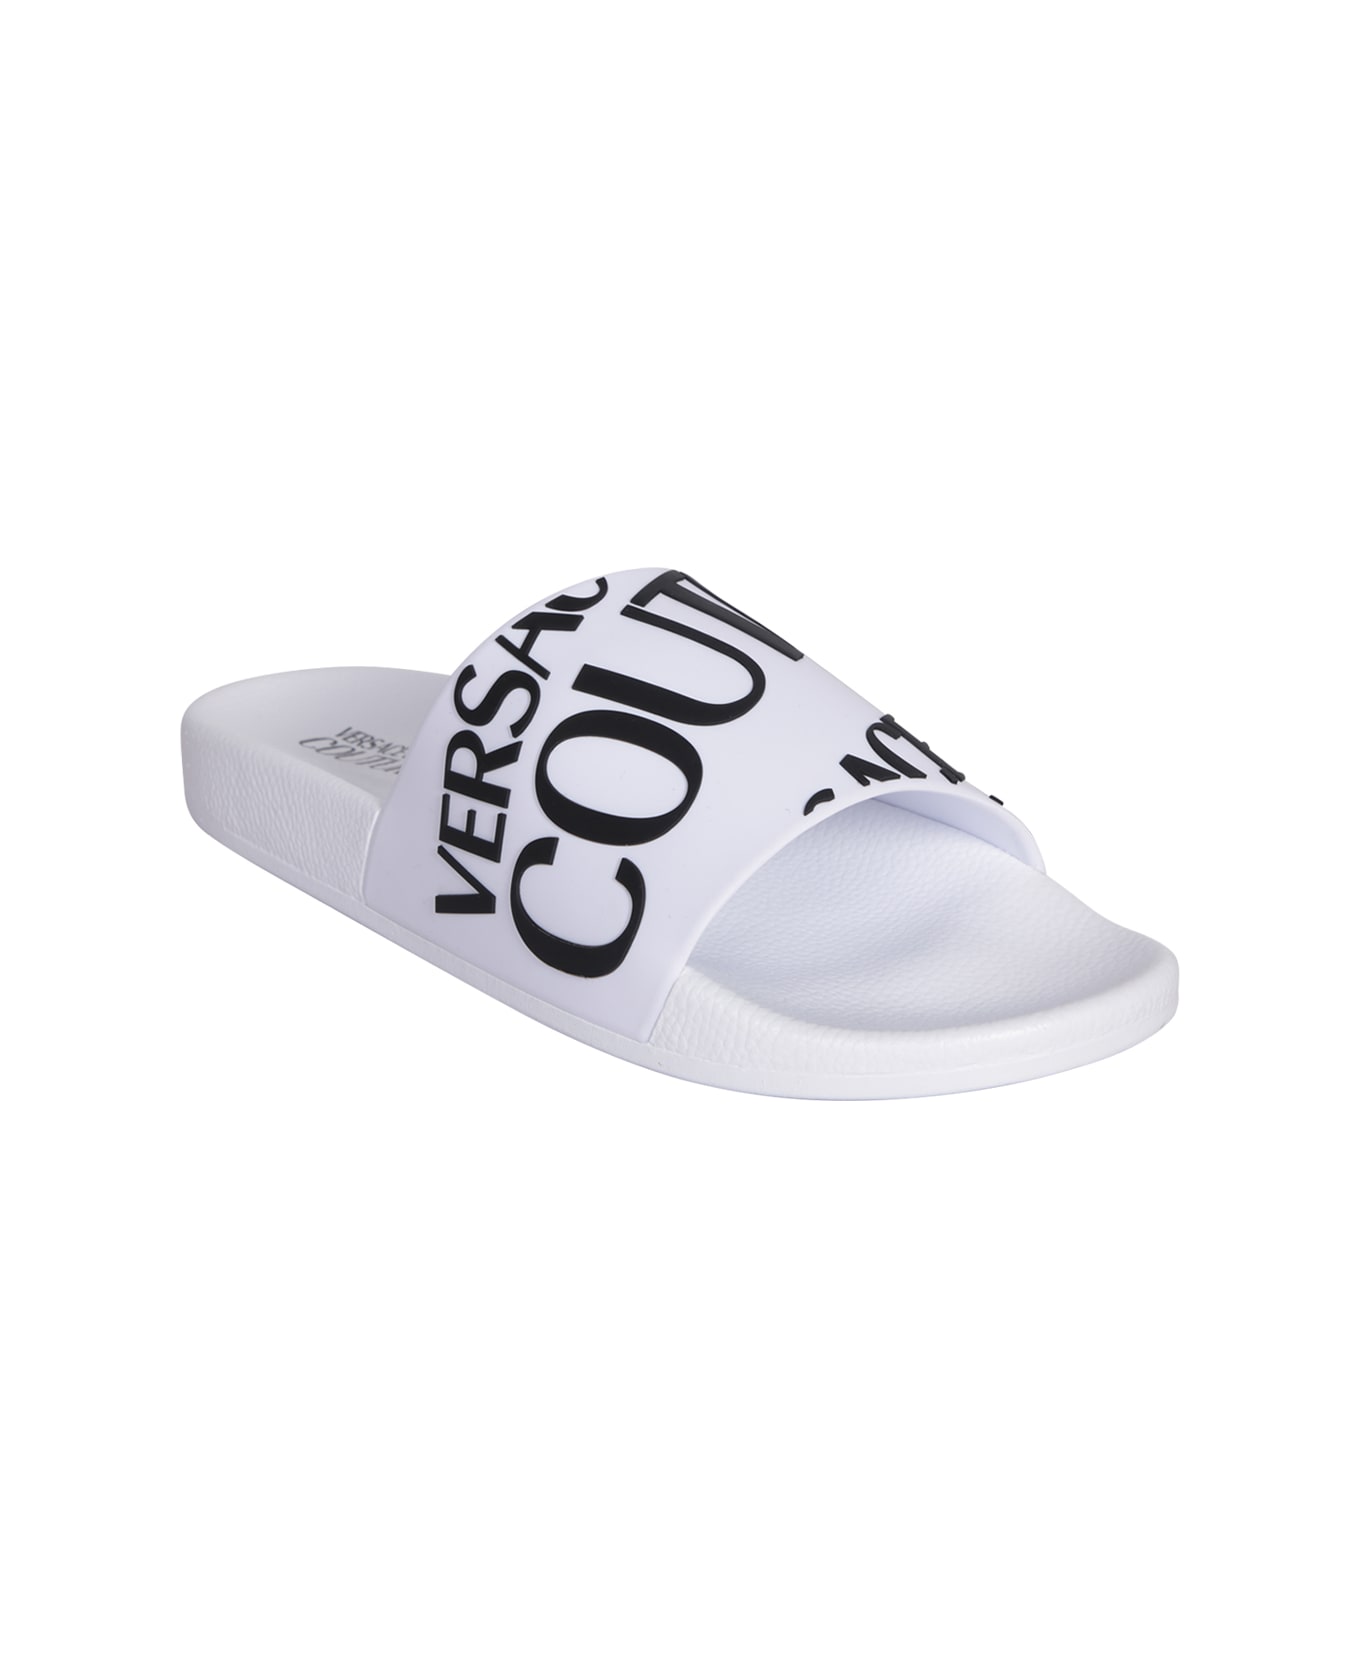 Versace Jeans Couture Shoes - White